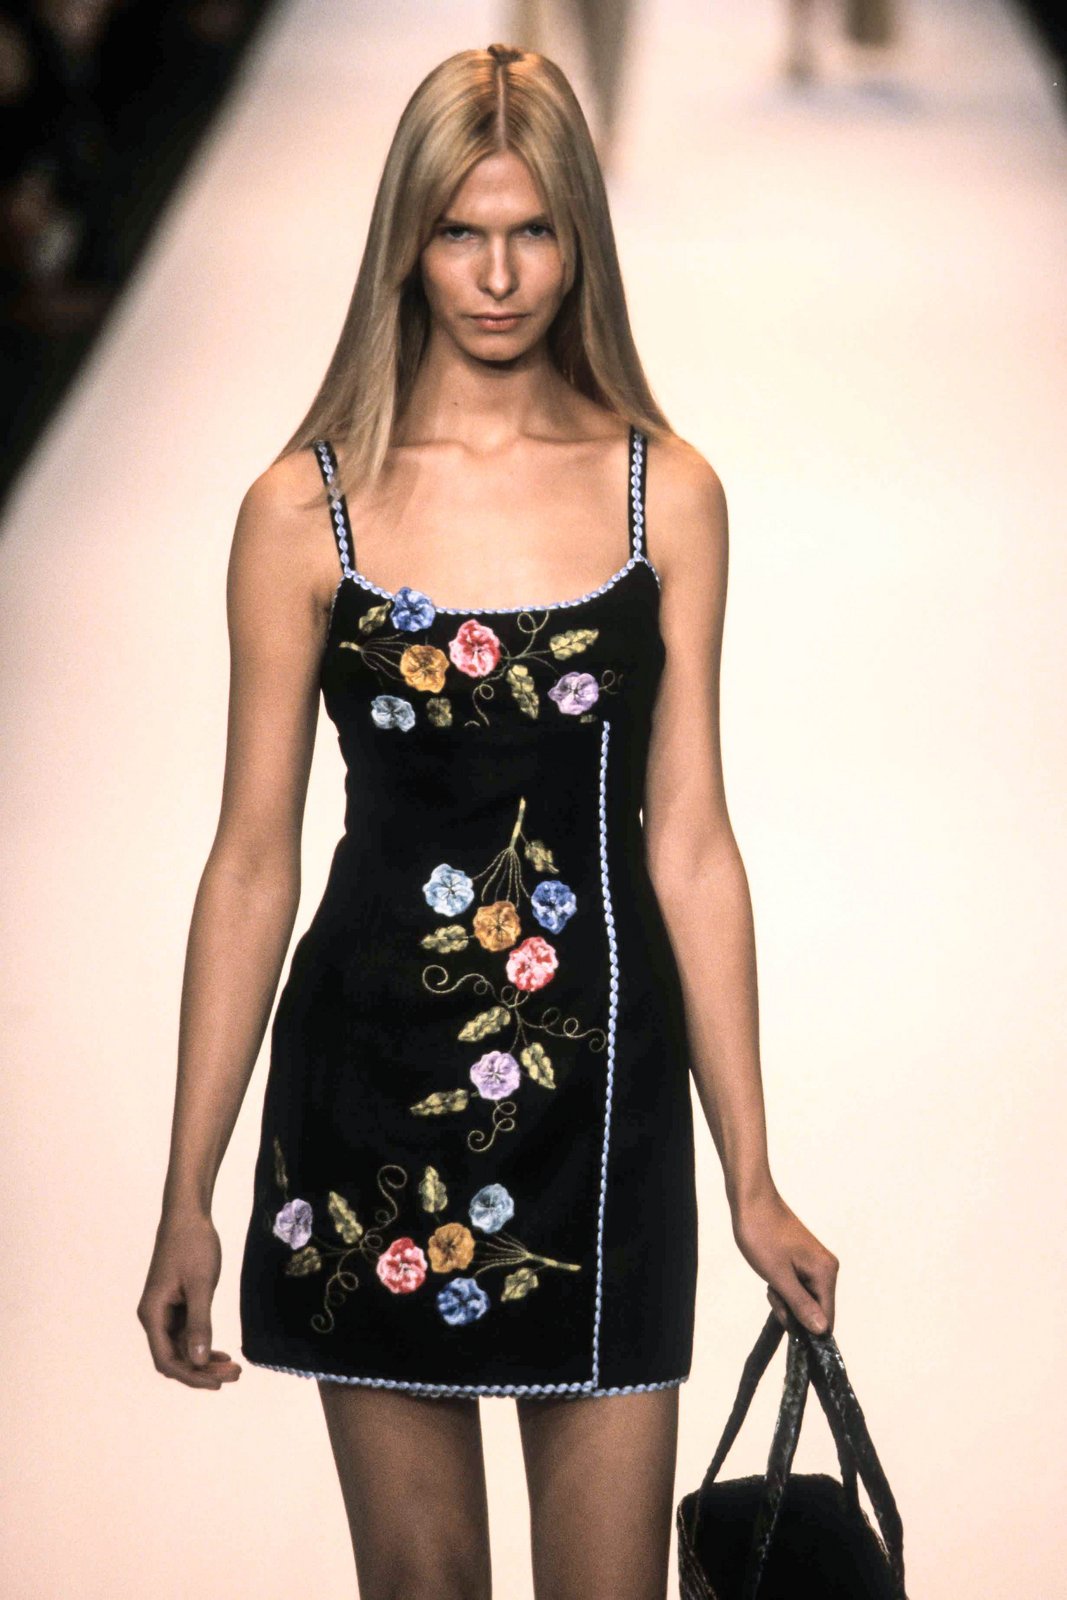 Under runway lights, 3-D Pansy Embroidered on Linen Dress, baby blue hem, bouquets design on front